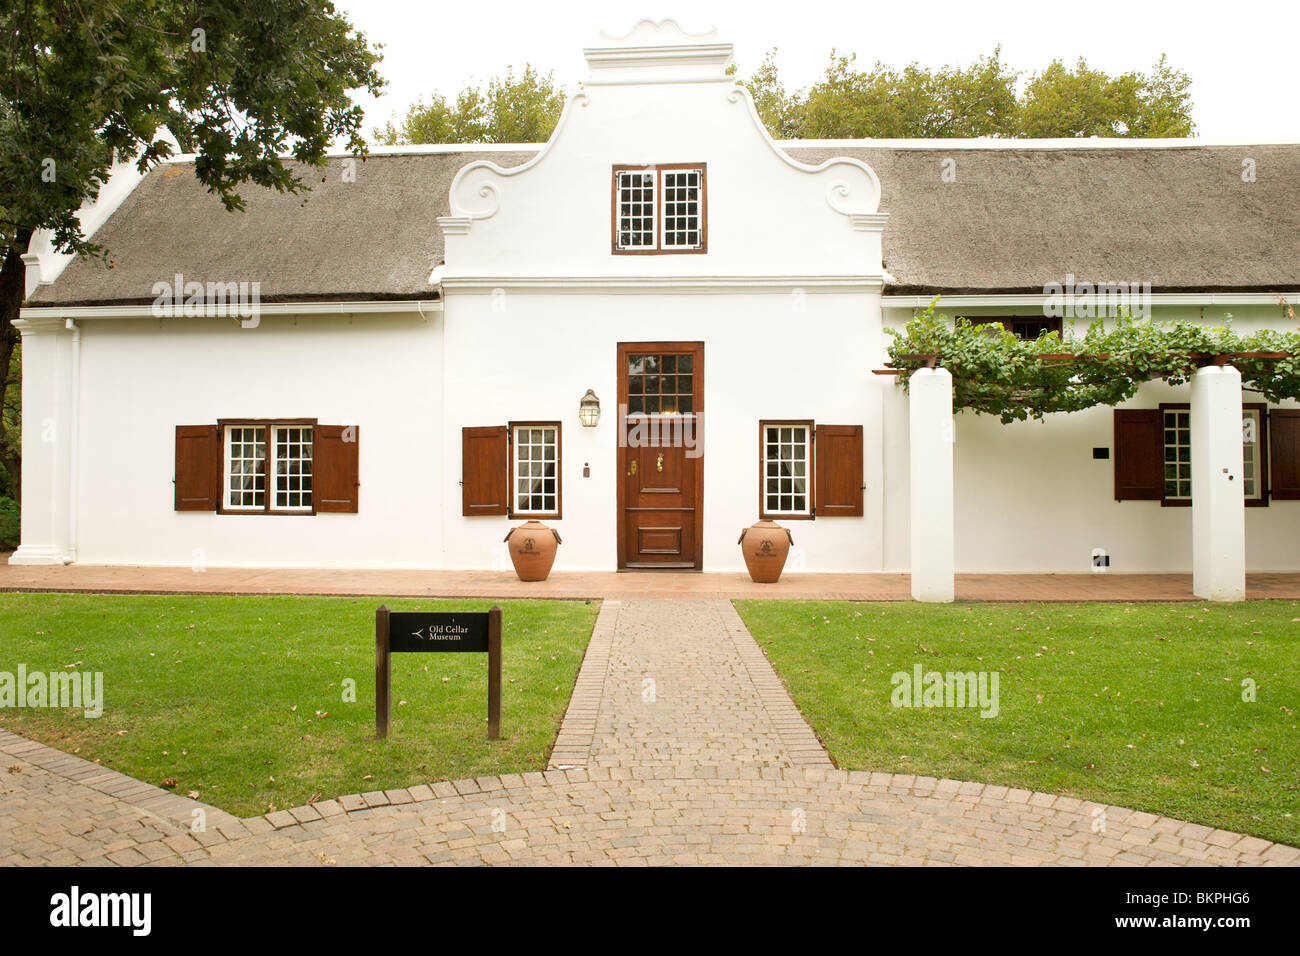 Manor house of the Nederburg wine estate in Paarl, Western Cape, South Africa. Stock Photo